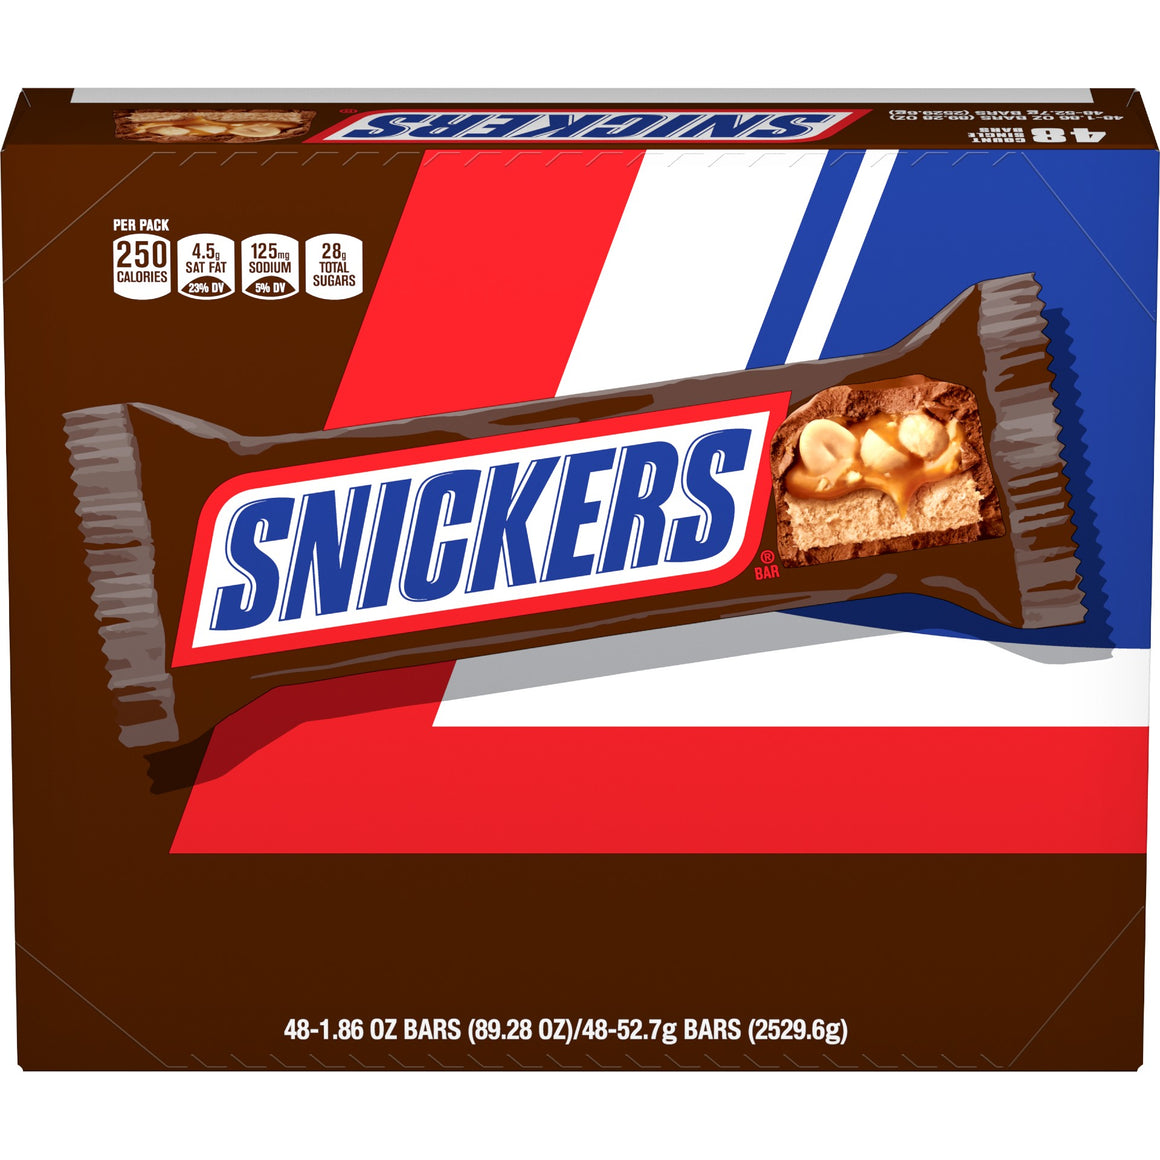 All City Candy Snickers Candy Bar 1.86 oz. 1 Bar Candy Bars Mars Chocolate For fresh candy and great service, visit www.allcitycandy.com